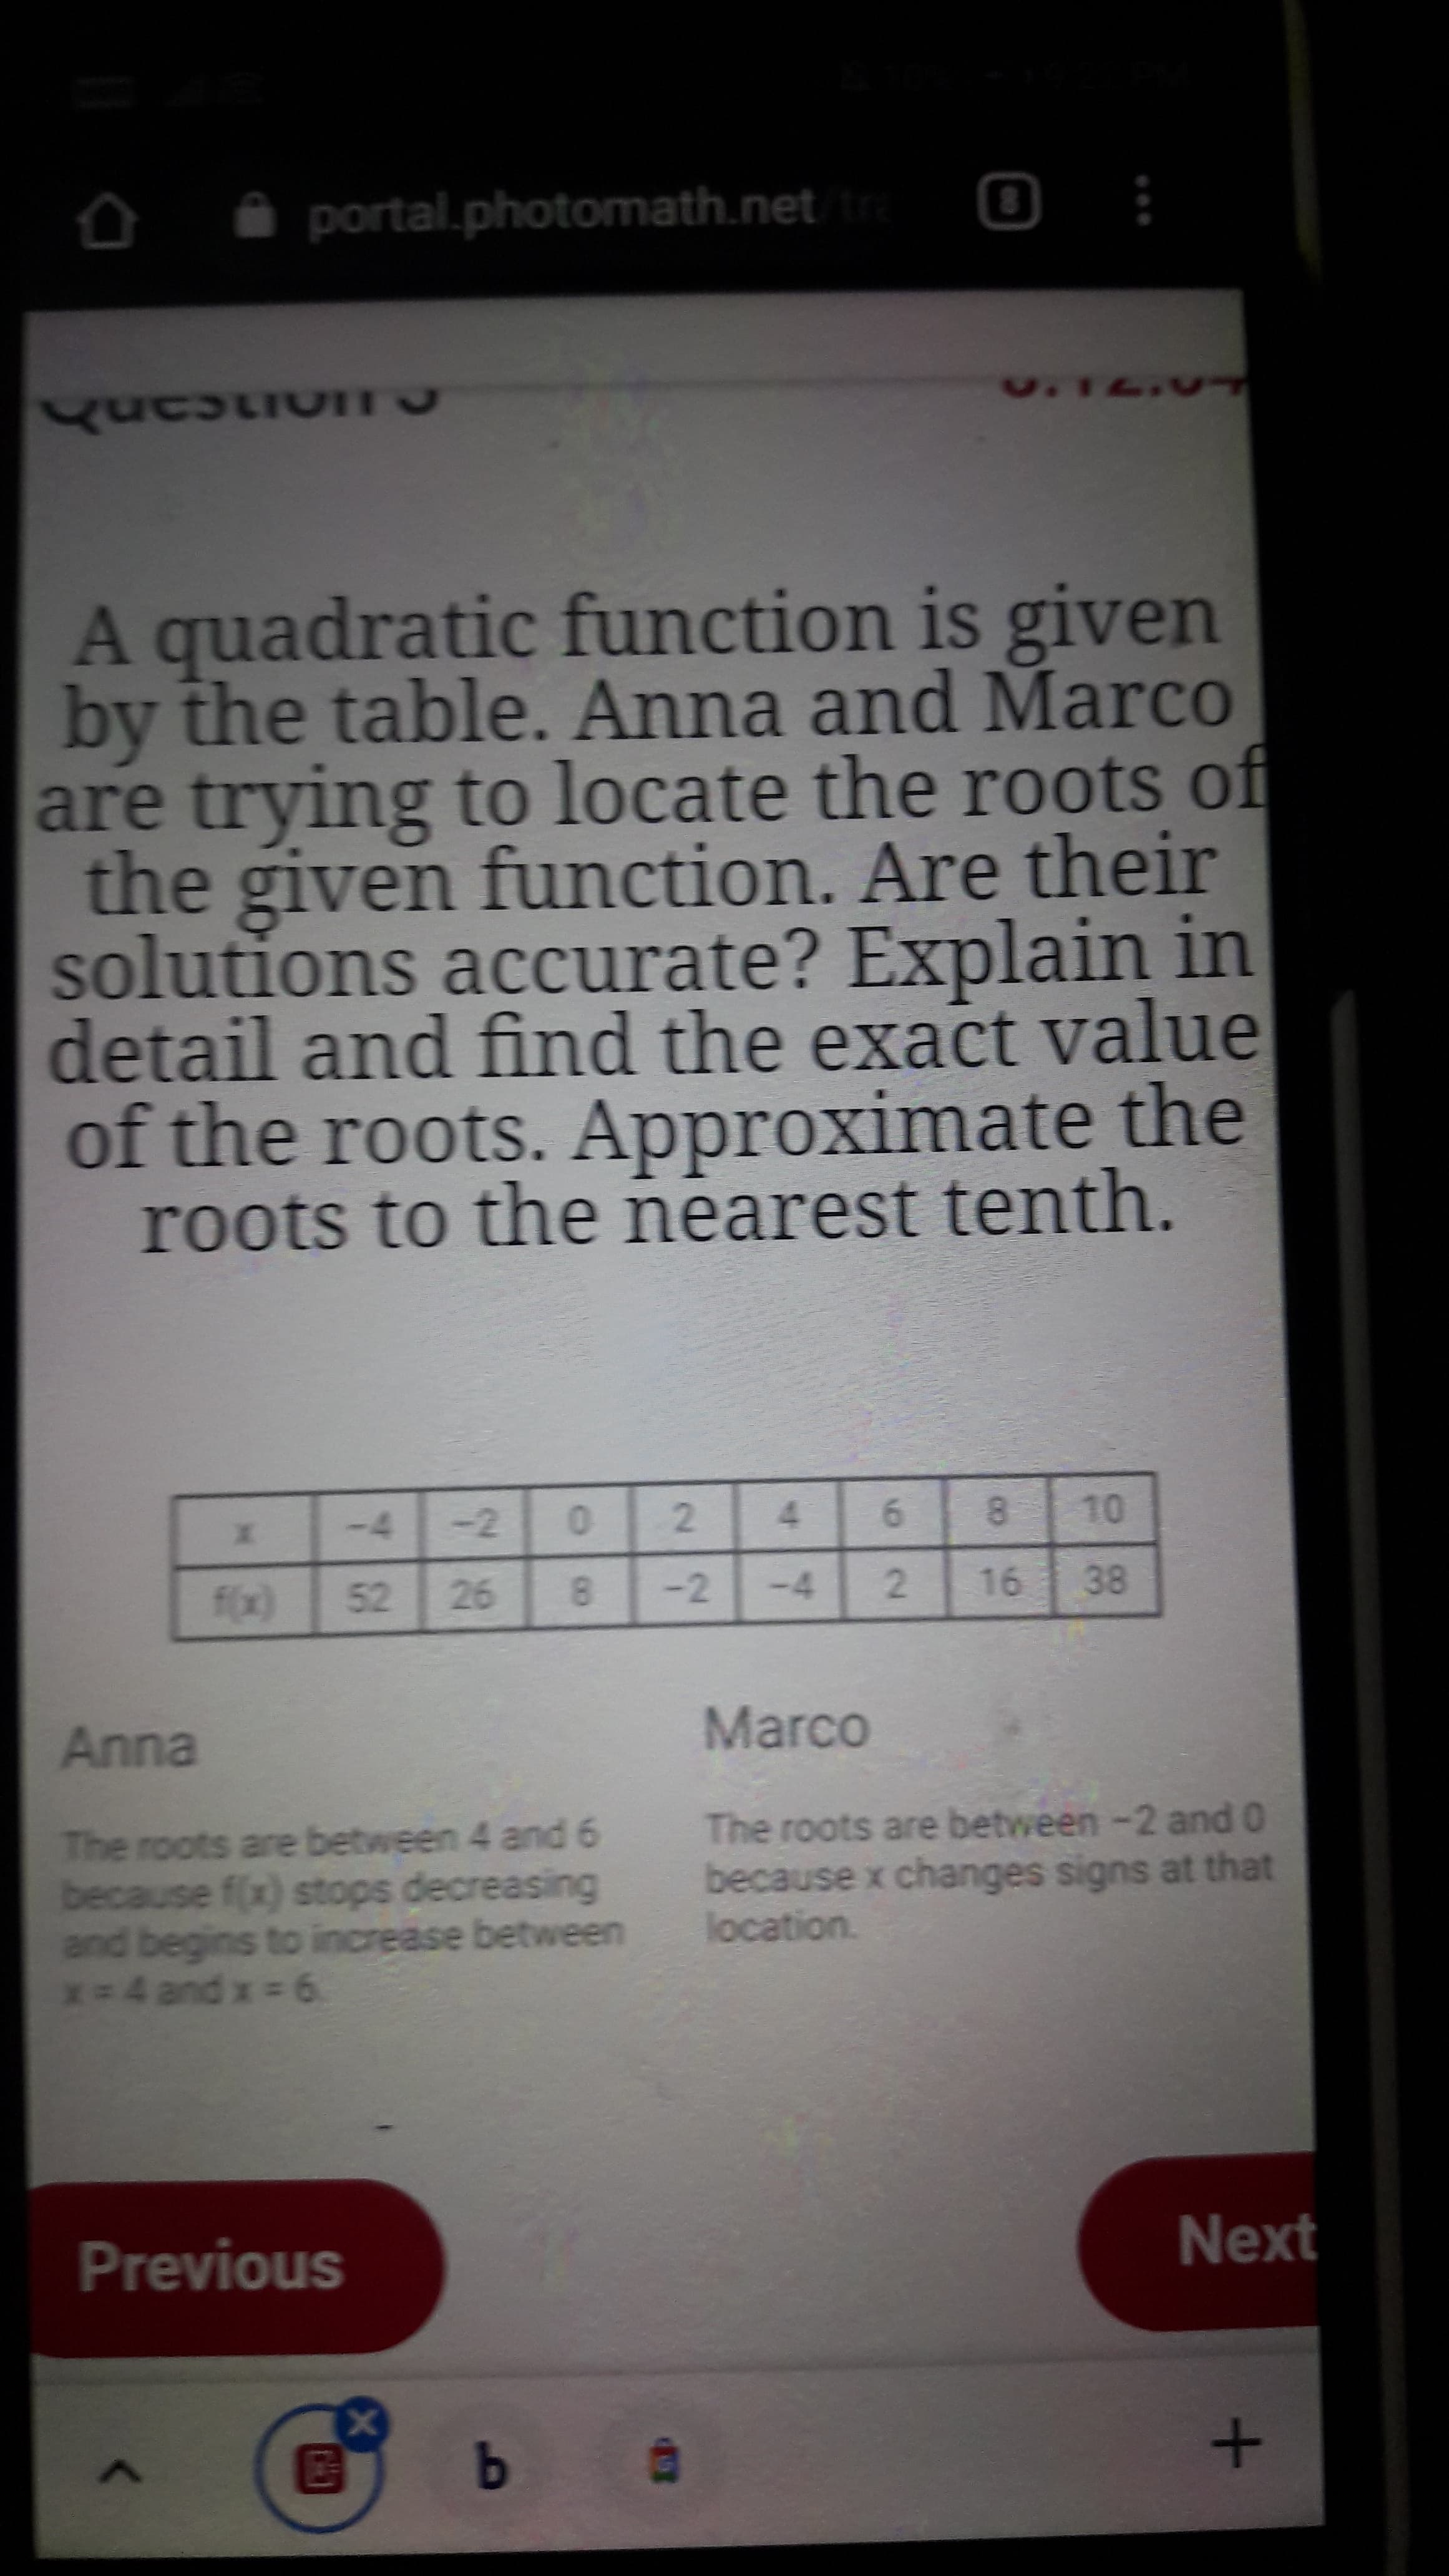 A quadratic function is given
by the table. Anna and Marco
are trying to locate the roots of
the given function. Are their
solutions accurate? Explain in
detail and find the exact value
of the roots. Approximate the
roots to the nearest tenth.
